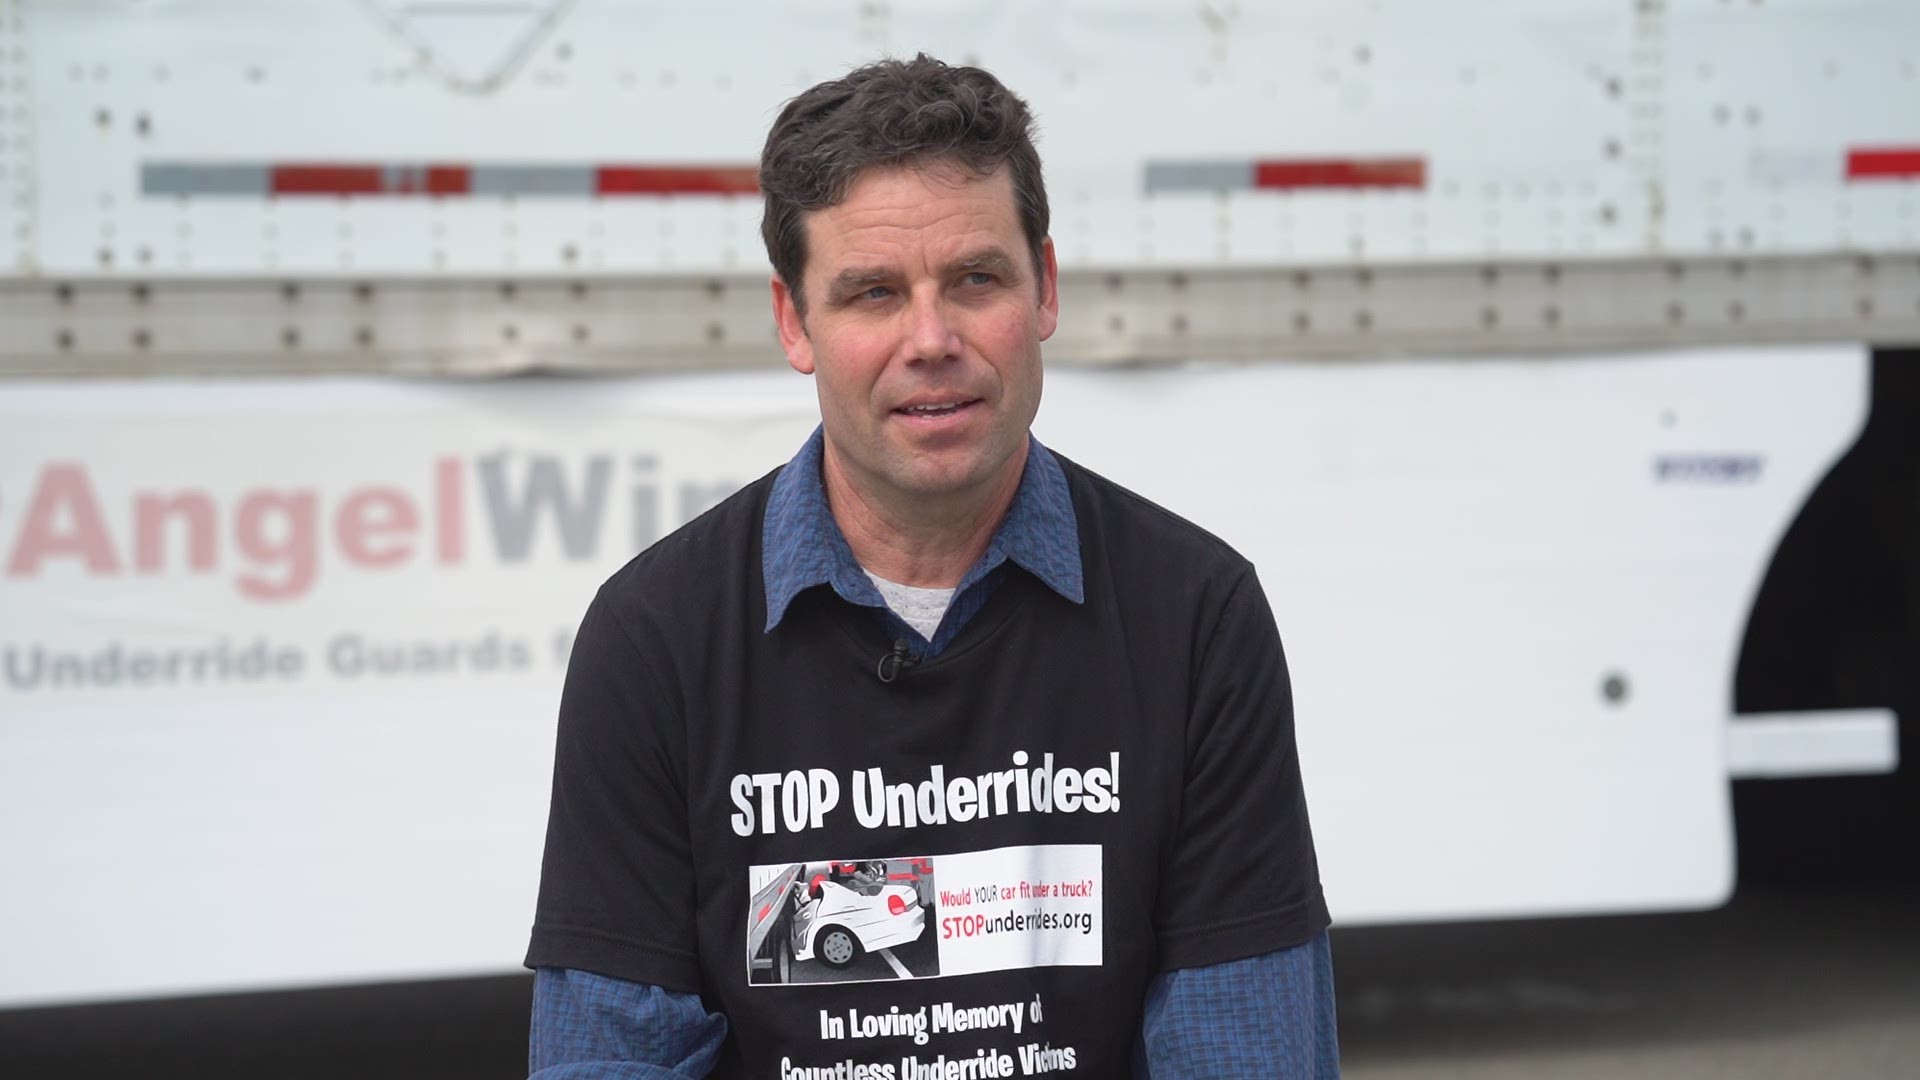 Safety advocates hope the judgement will force trucking companies to improve safety standards